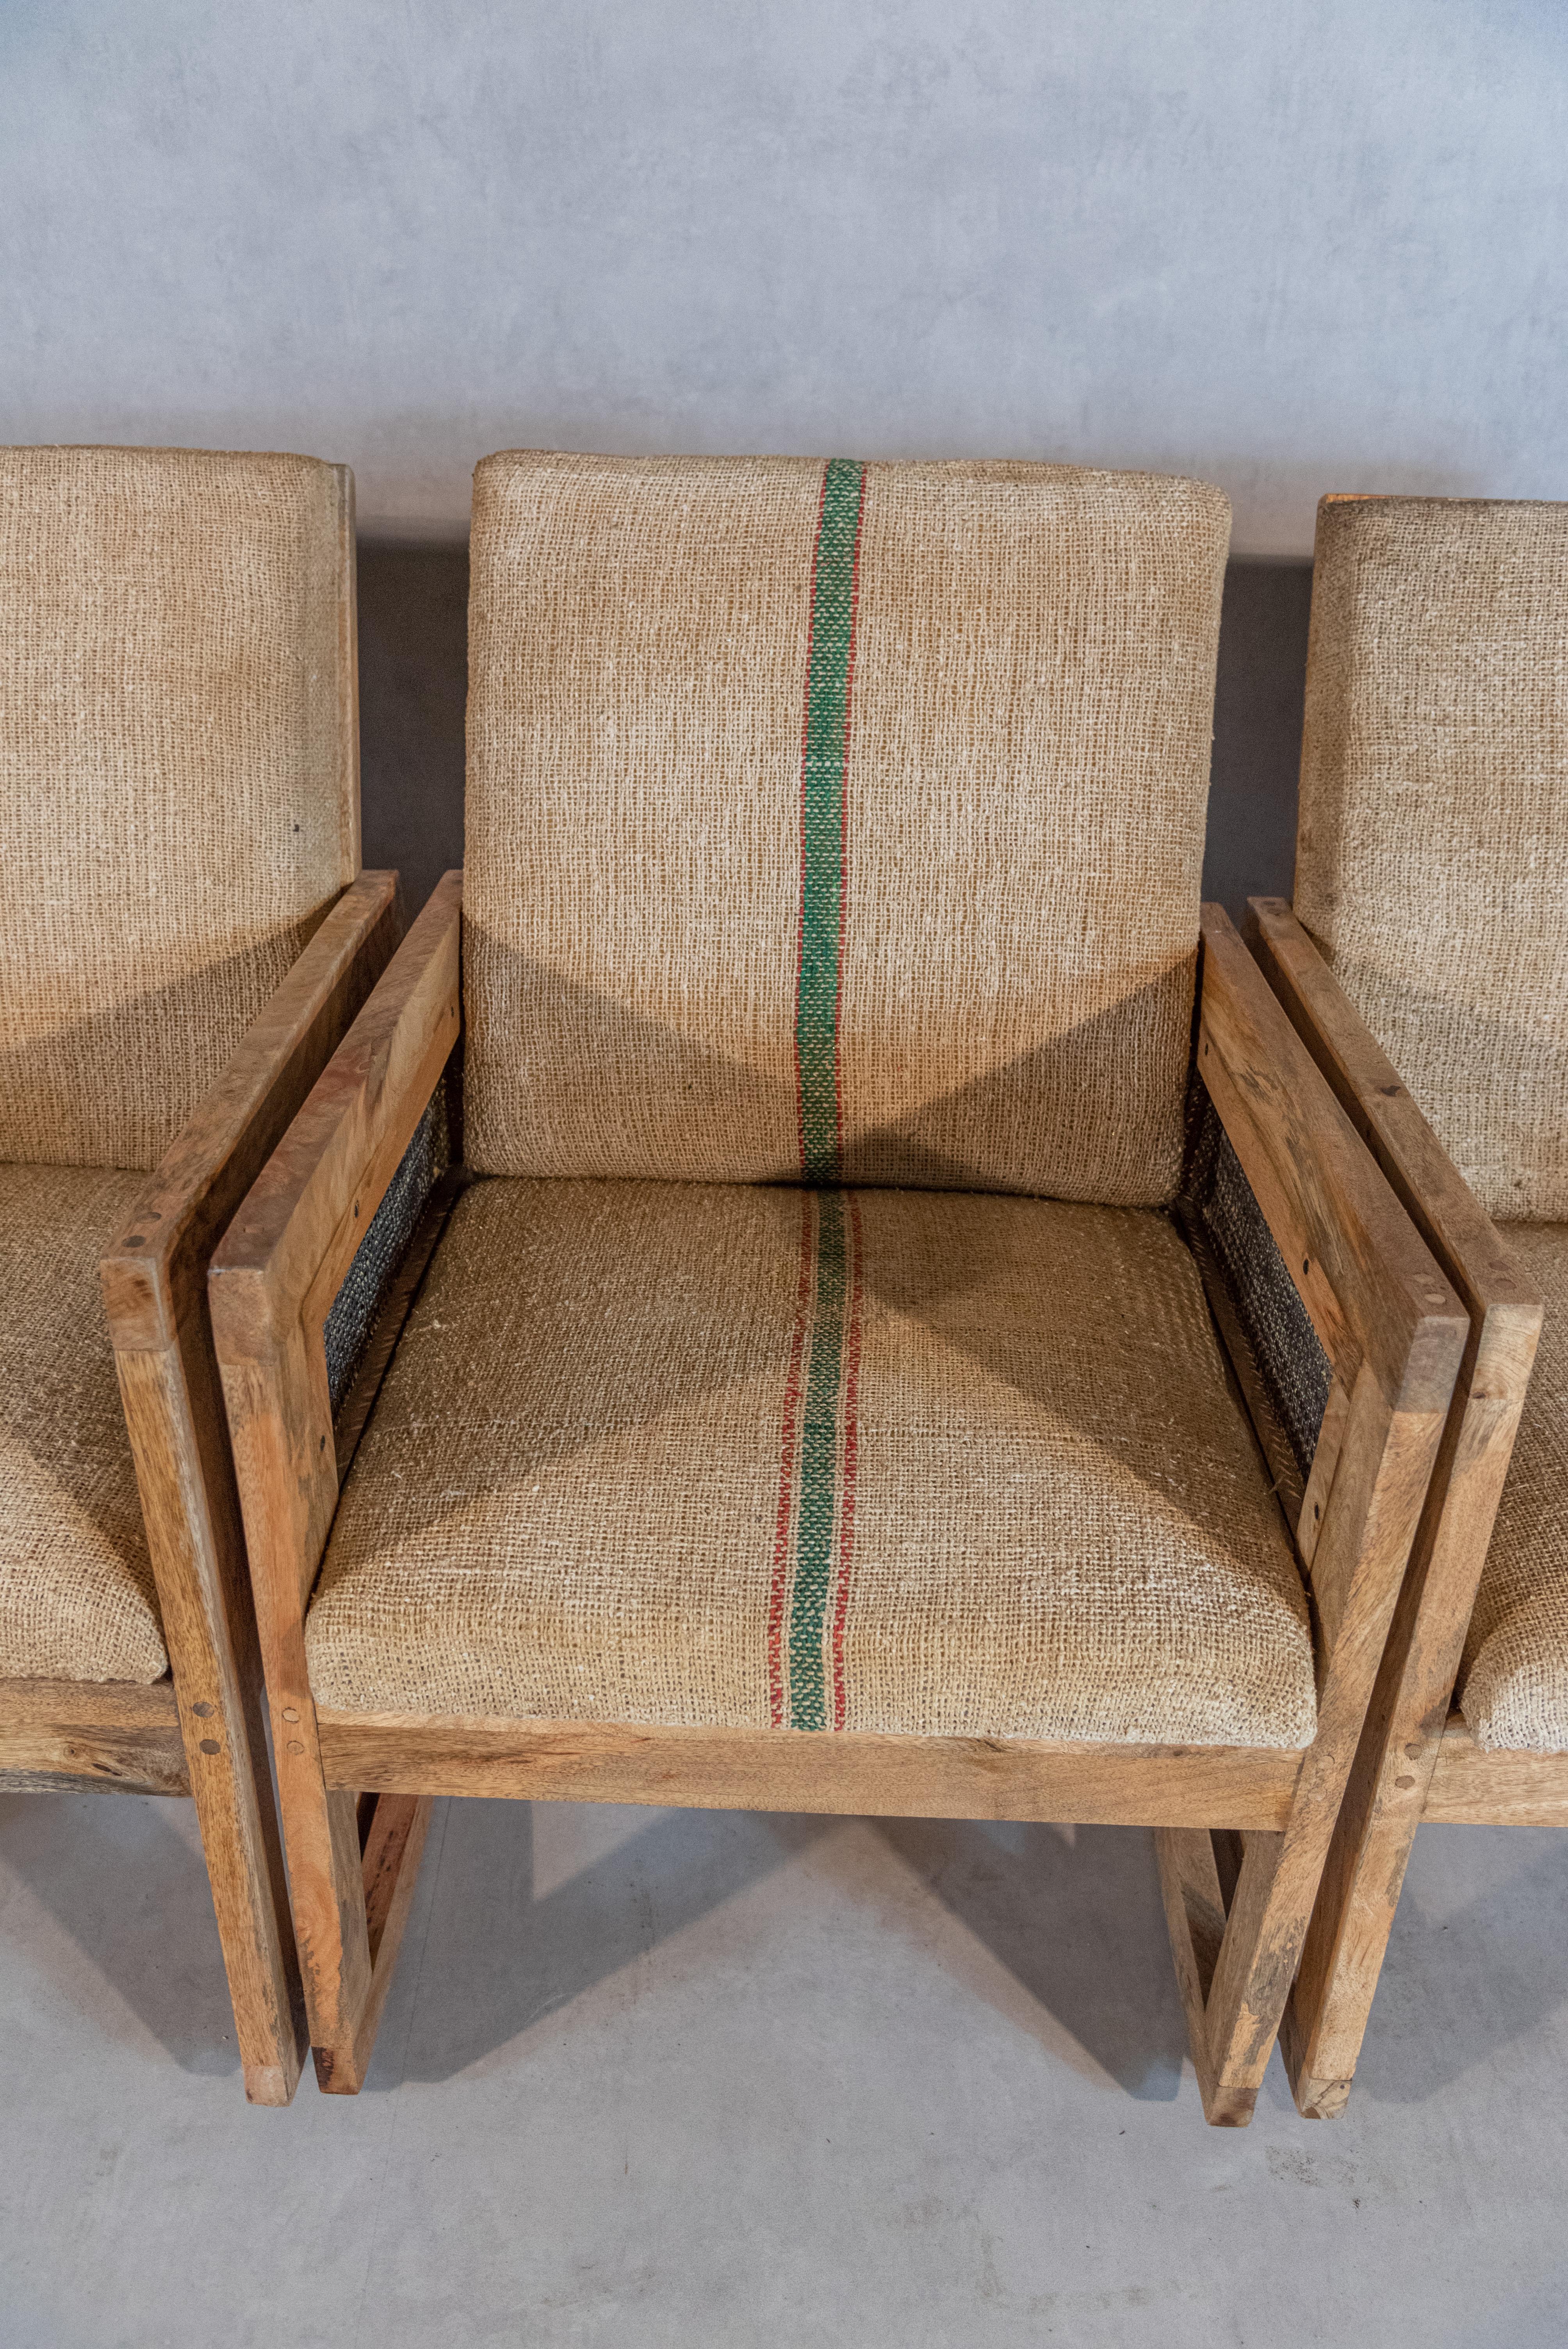 Four Mahogany & Hemp French Rocking Chairs In Good Condition For Sale In San Antonio, TX